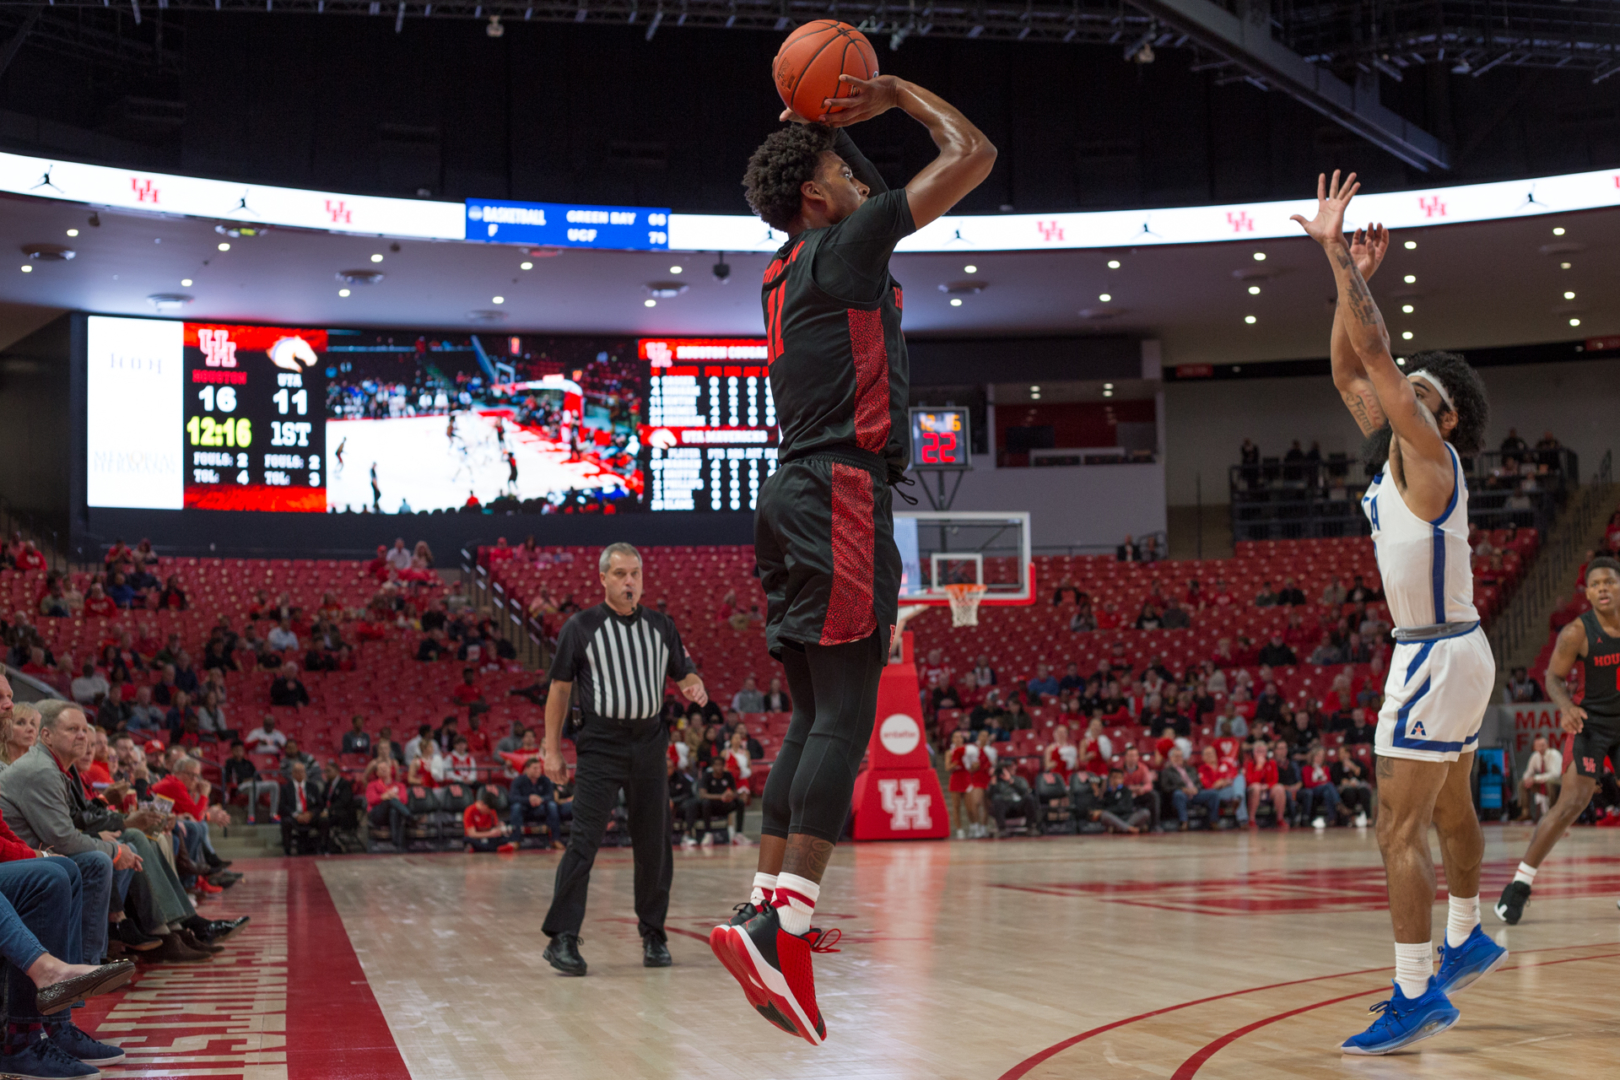 Sophomore guard Nate Hinton scored 11 points in Houston's 61-55 loss to Oklahoma State on Sunday at Fertitta Center. | Trevor Nolley/The Cougar